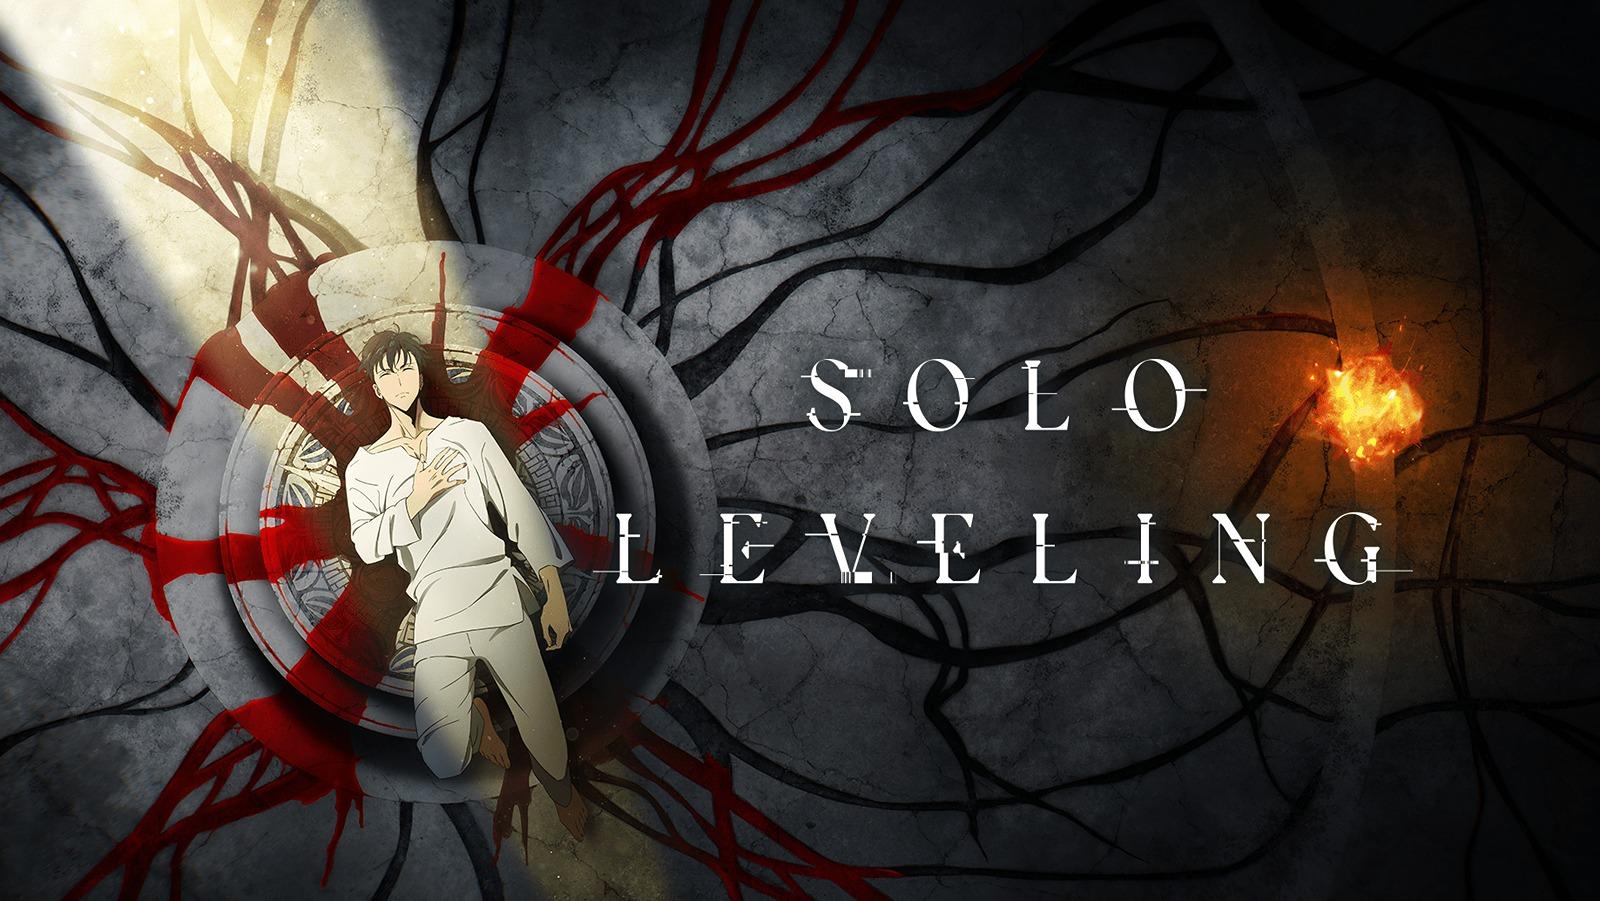 Where to Watch Solo Leveling Season 1? When is Solo Leveling